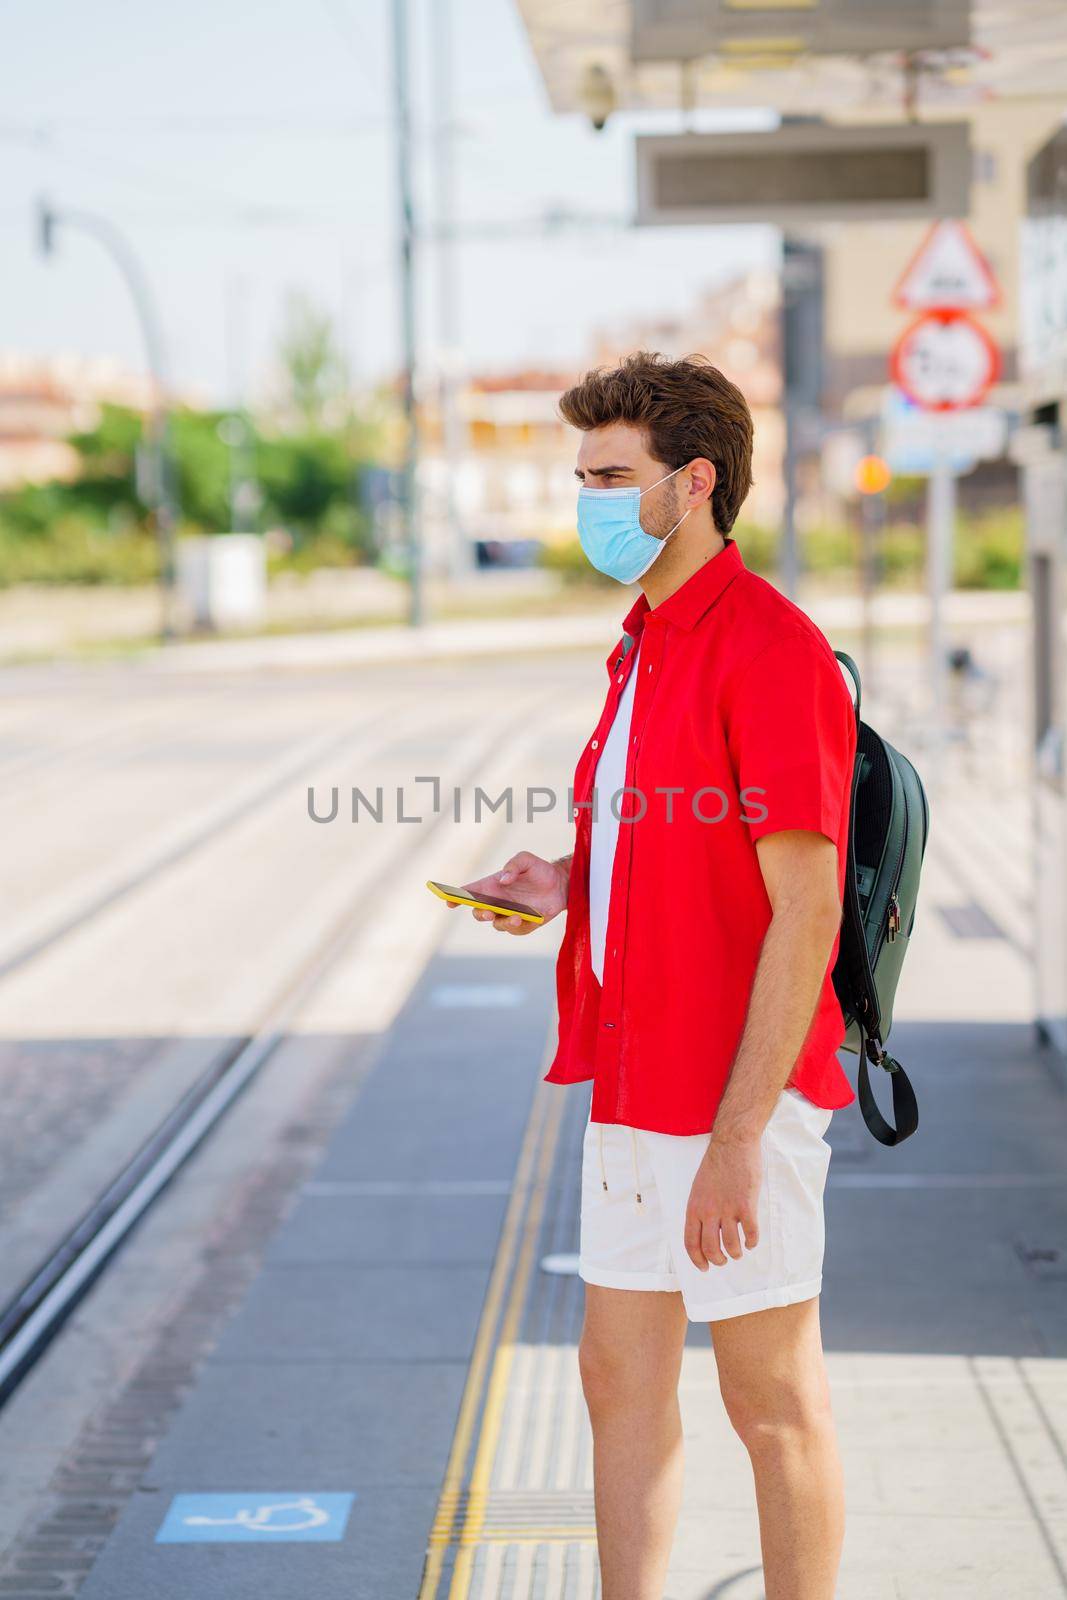 Student male wearing a surgical mask while waiting for a train at an outside station